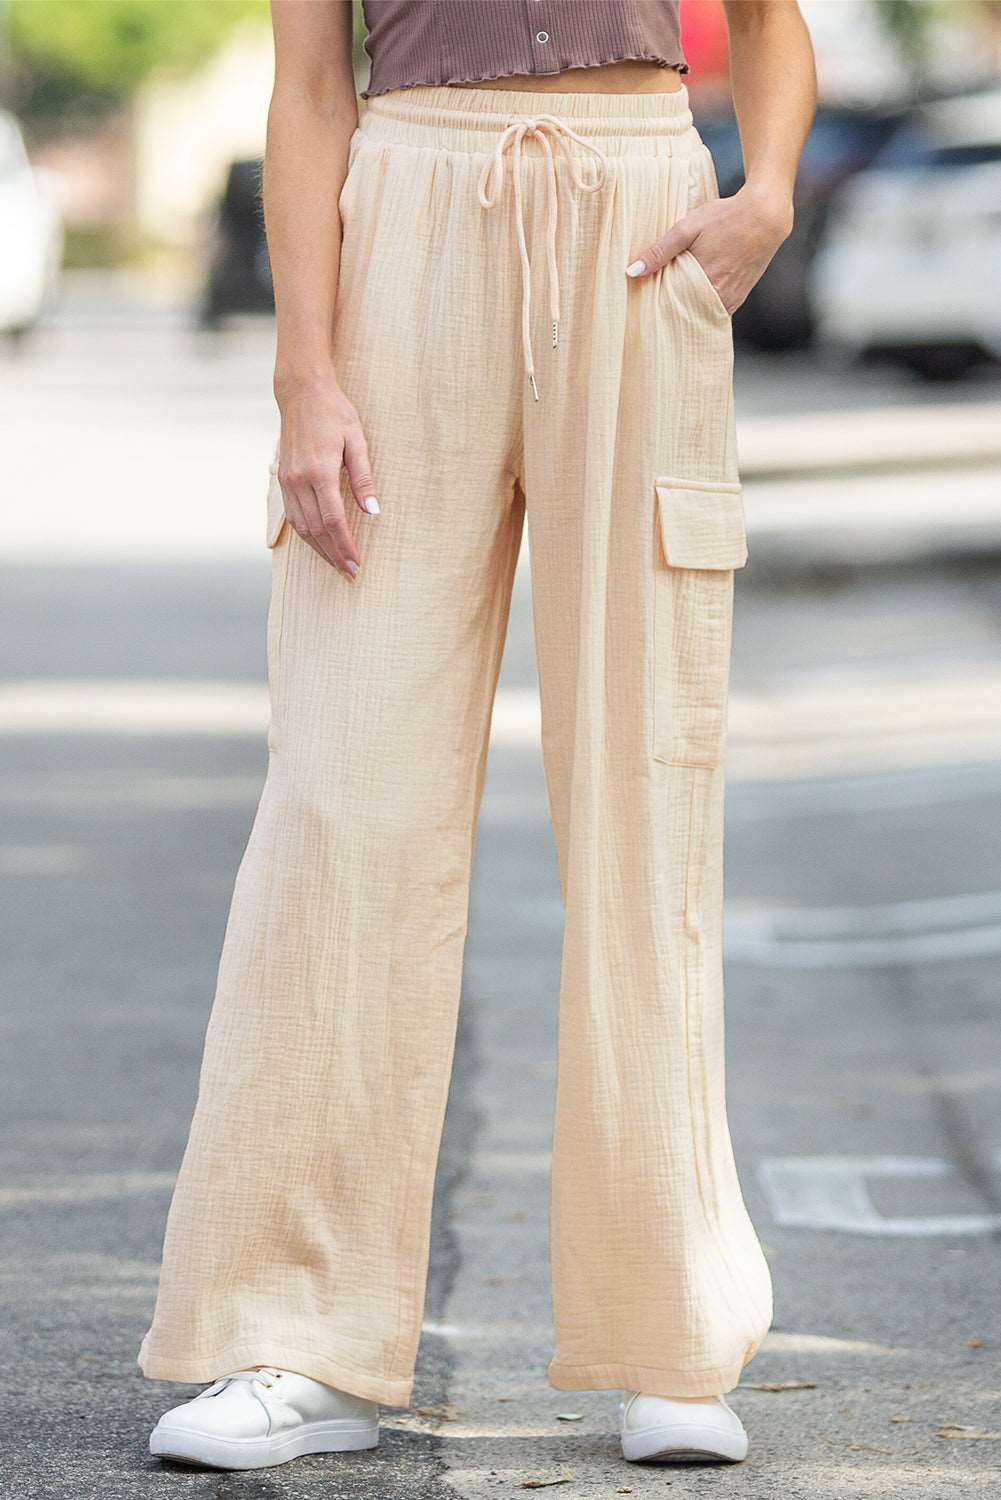 Apricot Loose Drawstring High Waist Crinkled Cargo Pants - Bellisima Clothing Collective